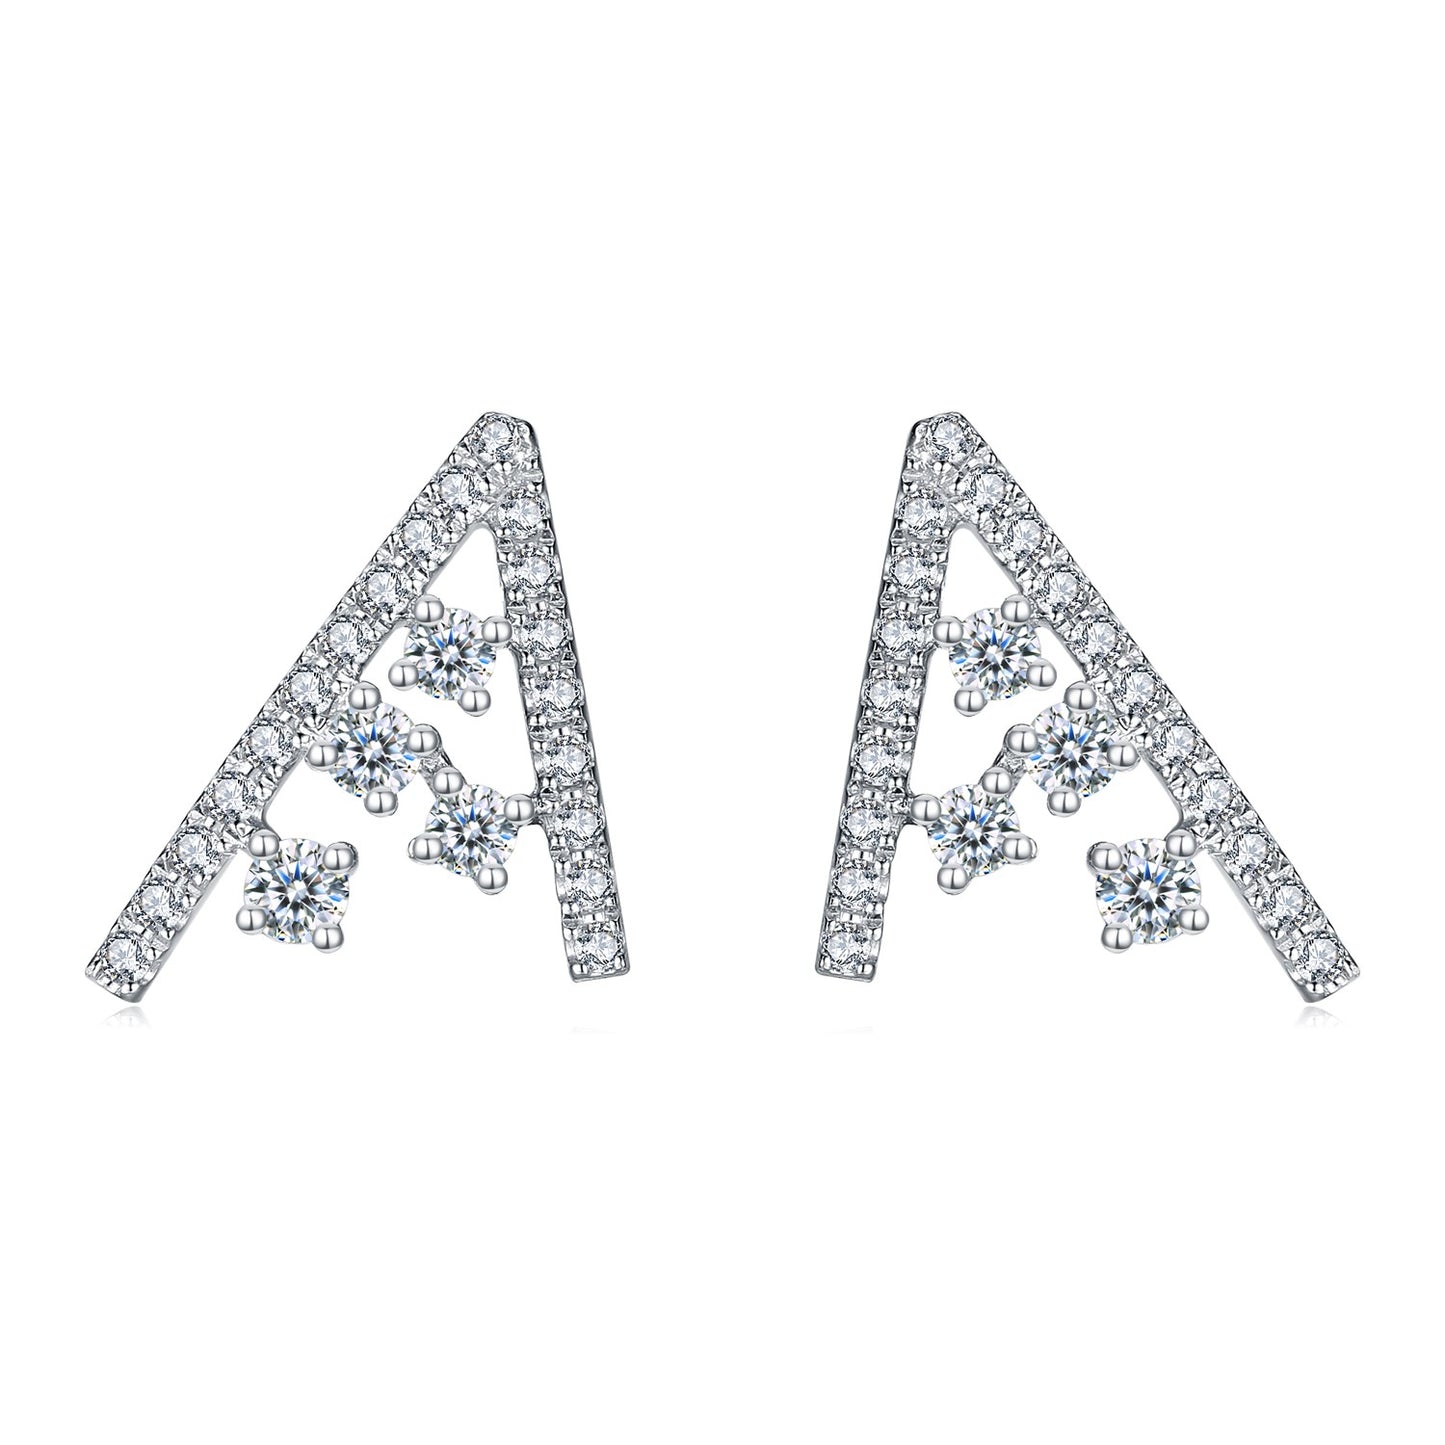 LEGACY--K18 White Gold and Diamonds Alphabet「A」Earrings